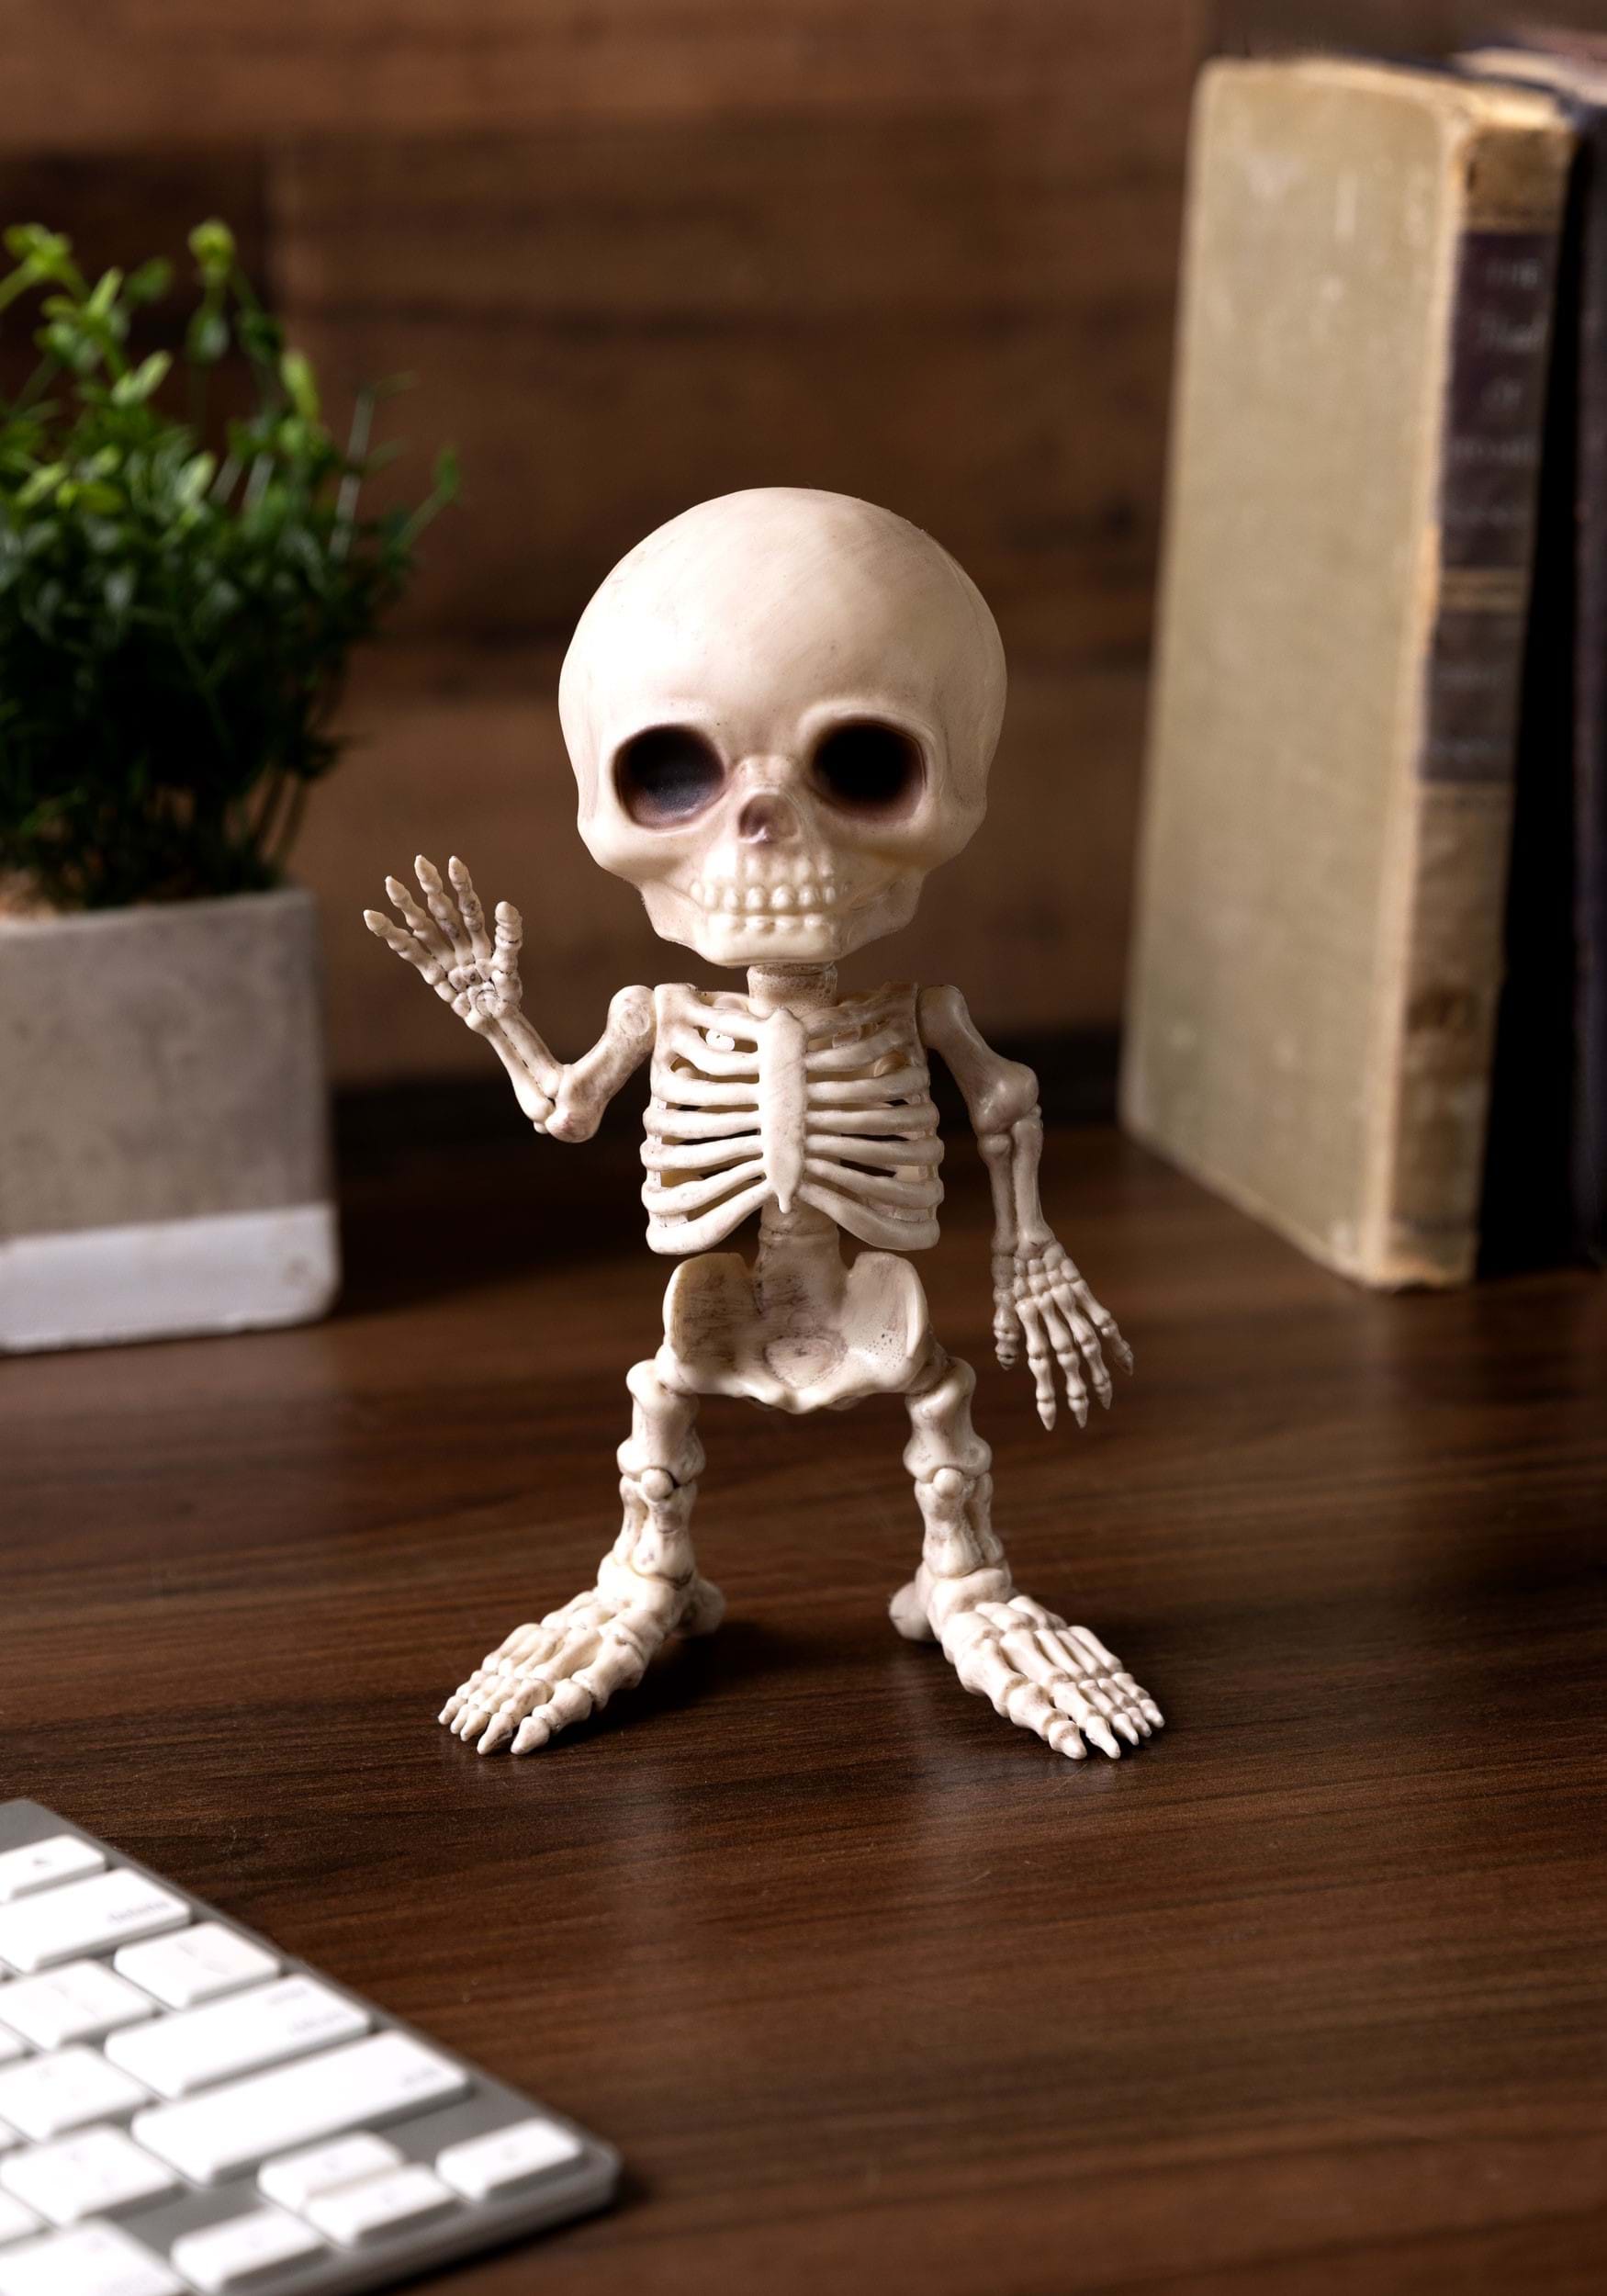 https://images.halloween.com/products/93280/1-1/7-inch-mini-skeleton-decoration.jpg